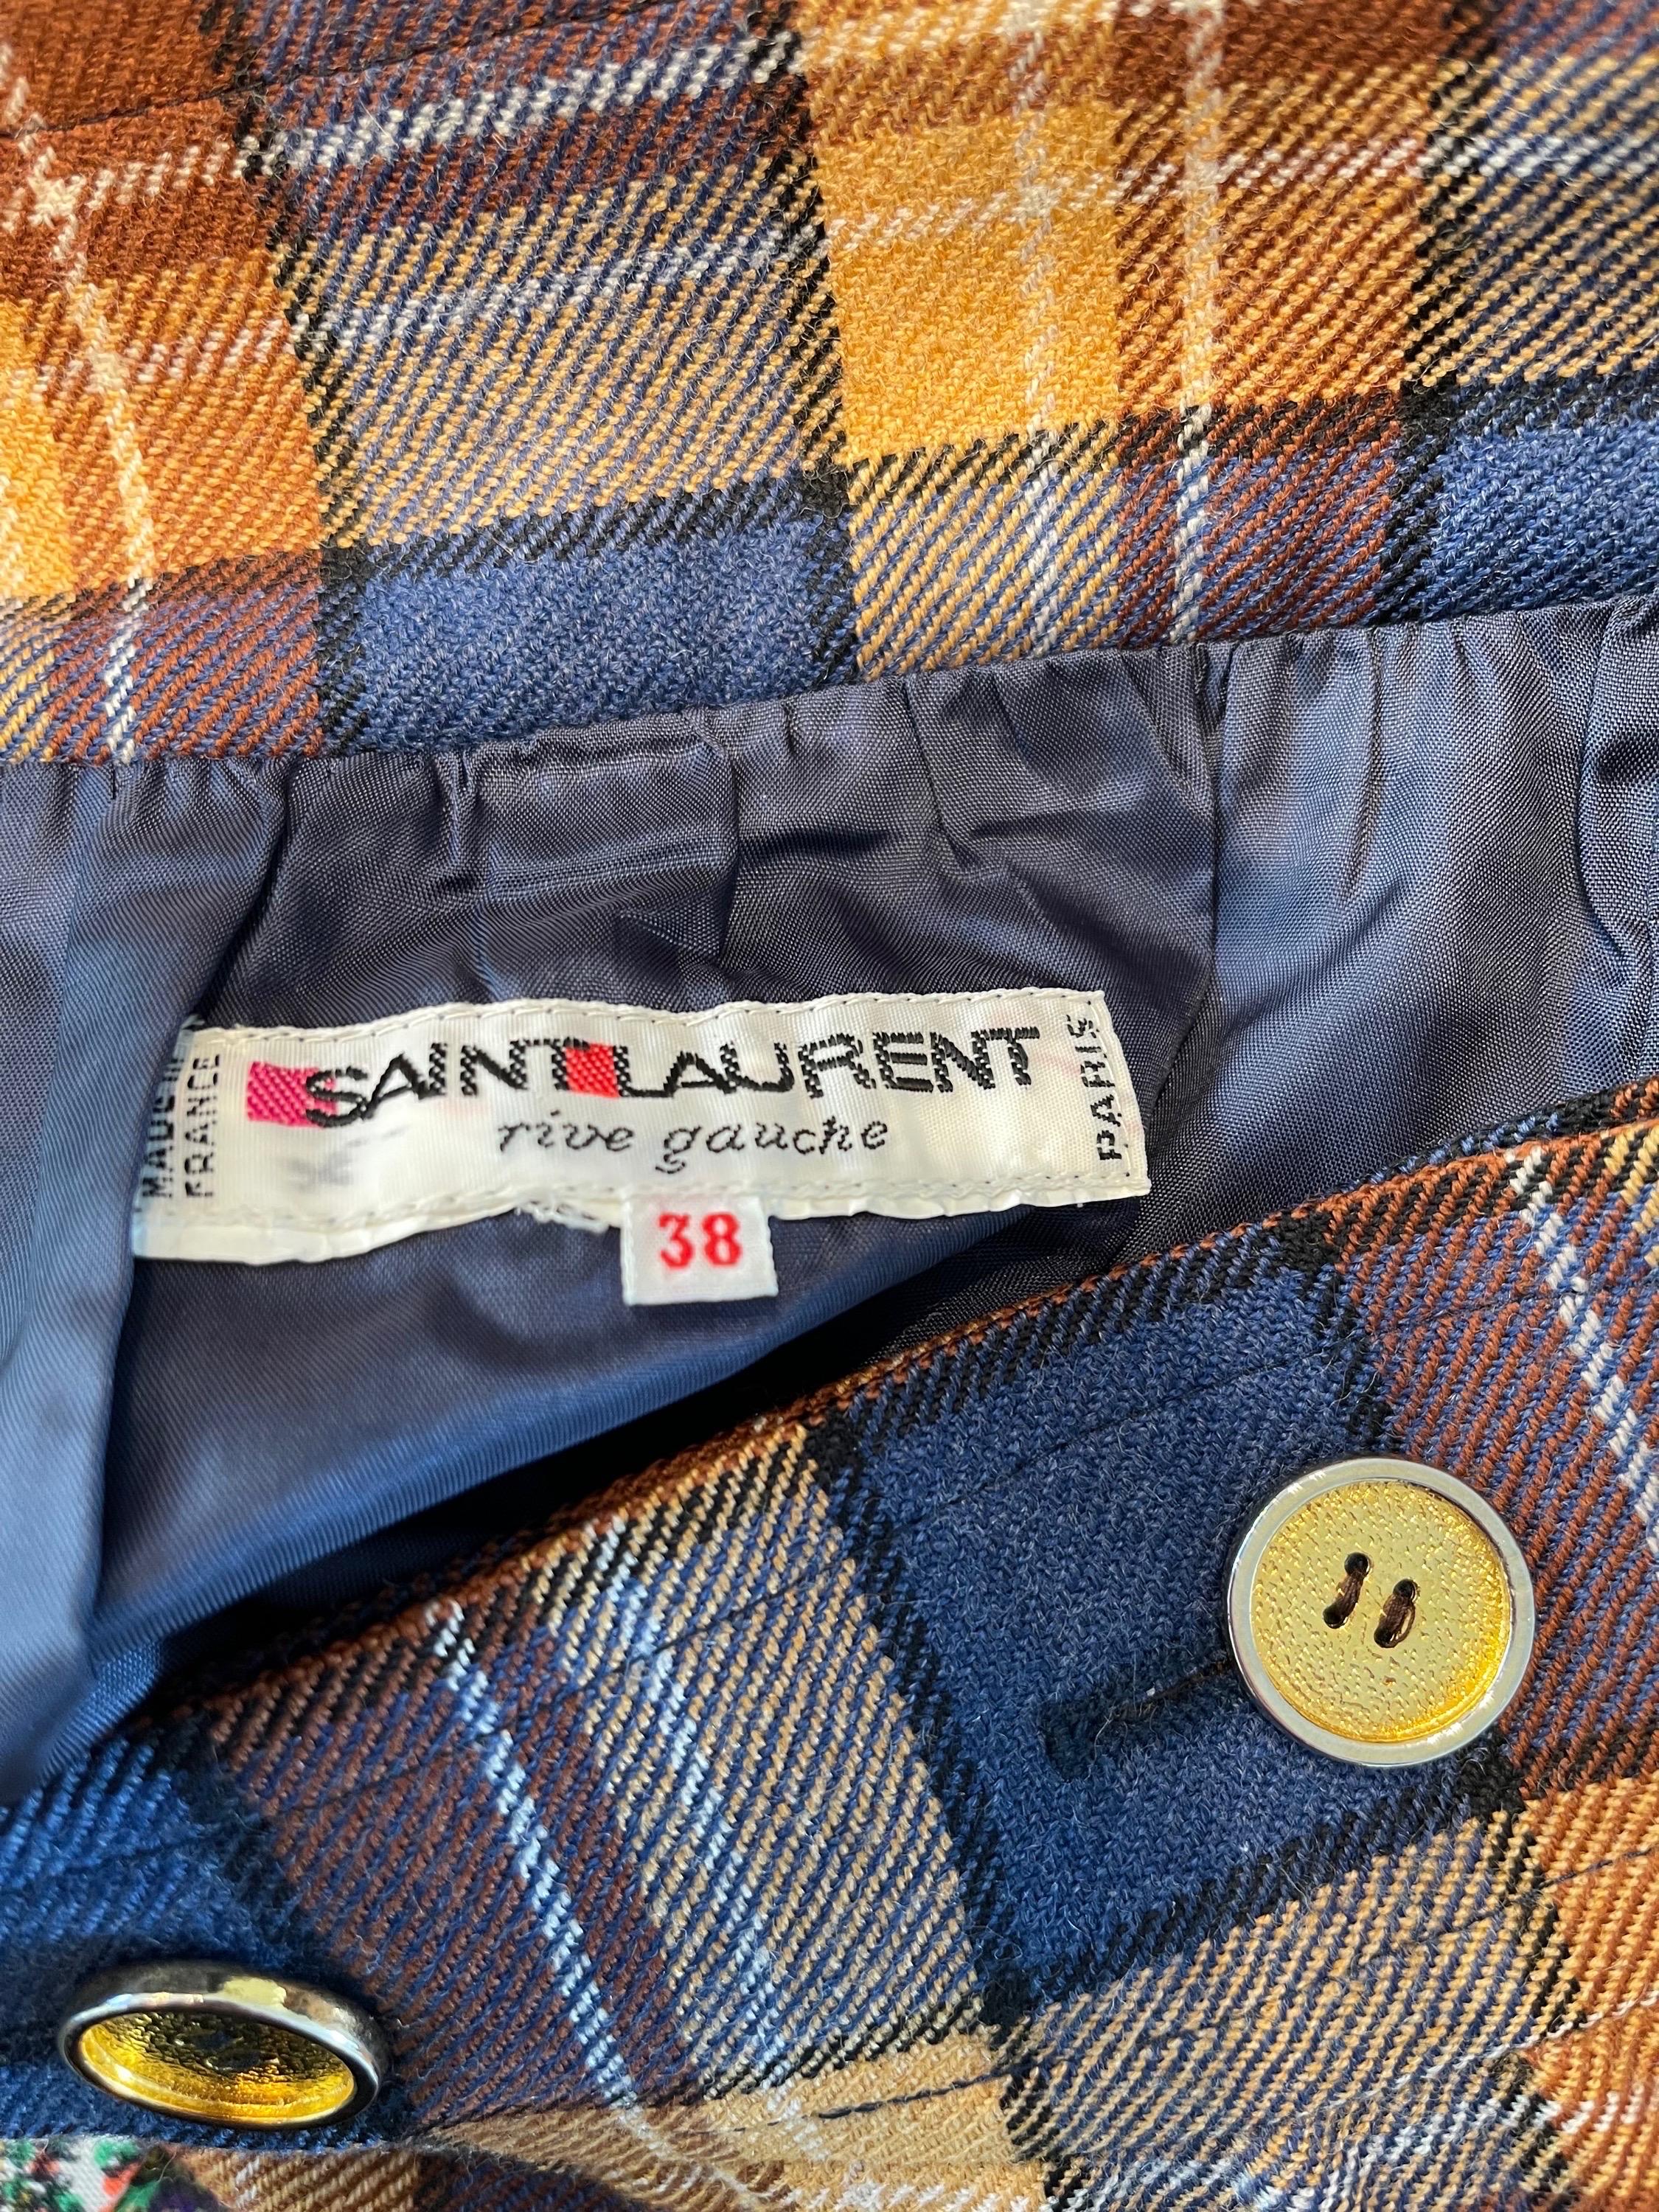 Chic 1970s YVES SAINT LAURNT Rive Gauche plaid wool skirt ! This YSL skirt has warm hues of navy blue, nude, tan and brown. Gold buttons down the front. Lightweight wool ; fully lined. Would look great with brown boots.
In great condition 
Made in